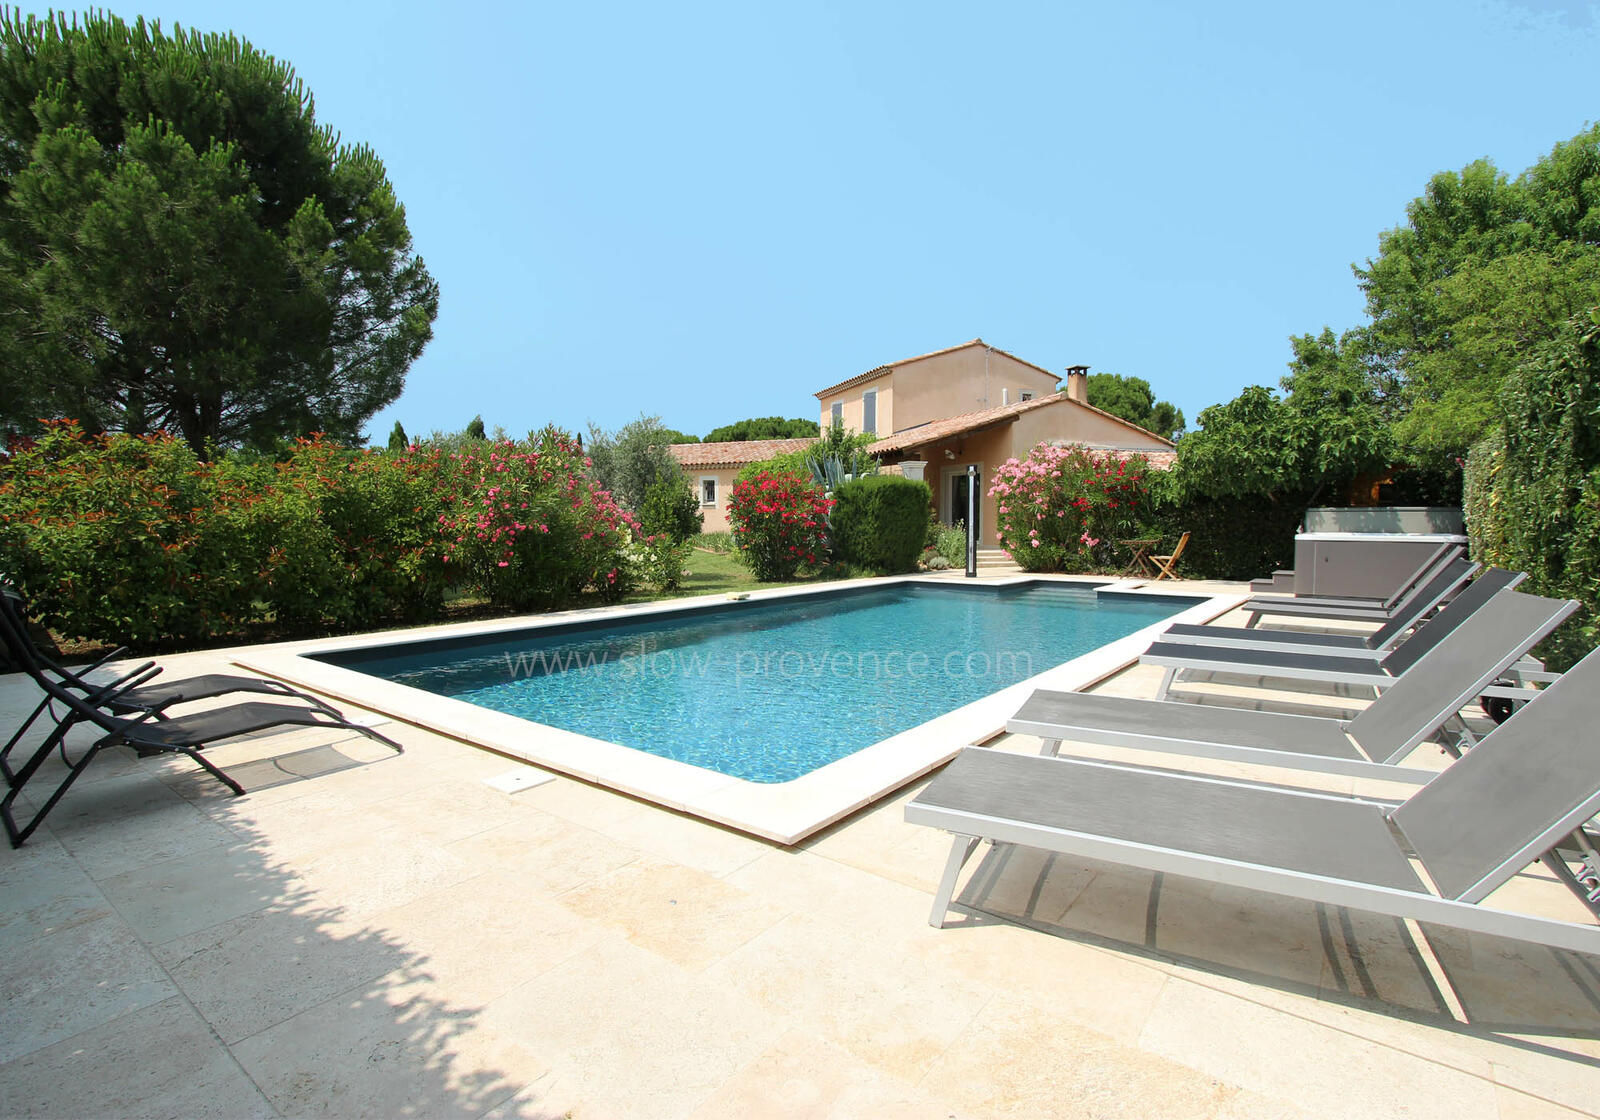 For a superb holiday in Provence